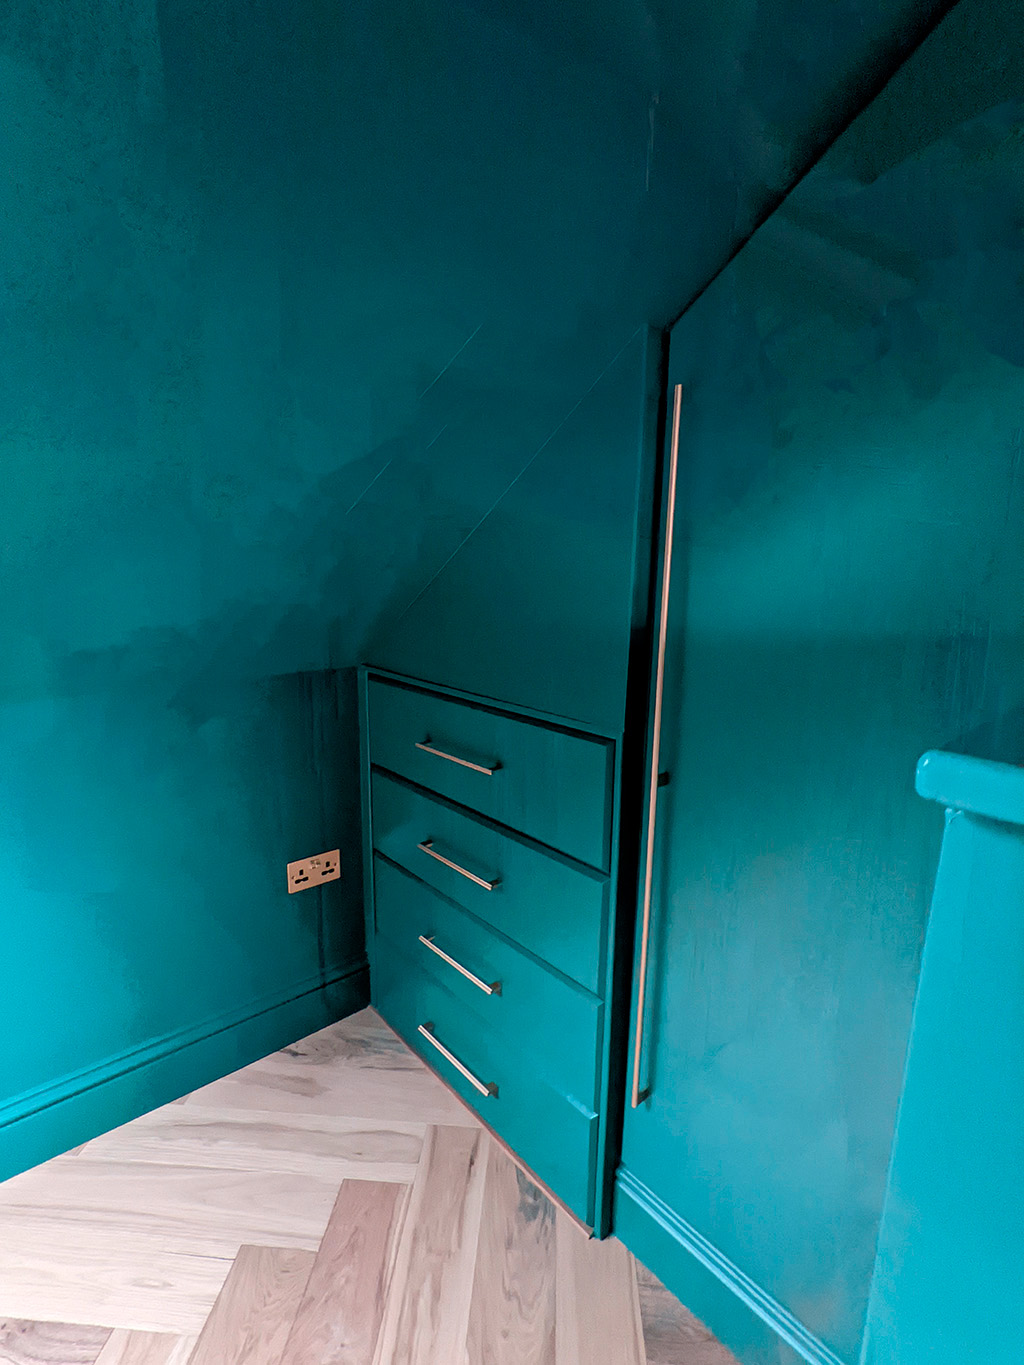 A photo of the painted drawers and tall cupboard in the bedroom.